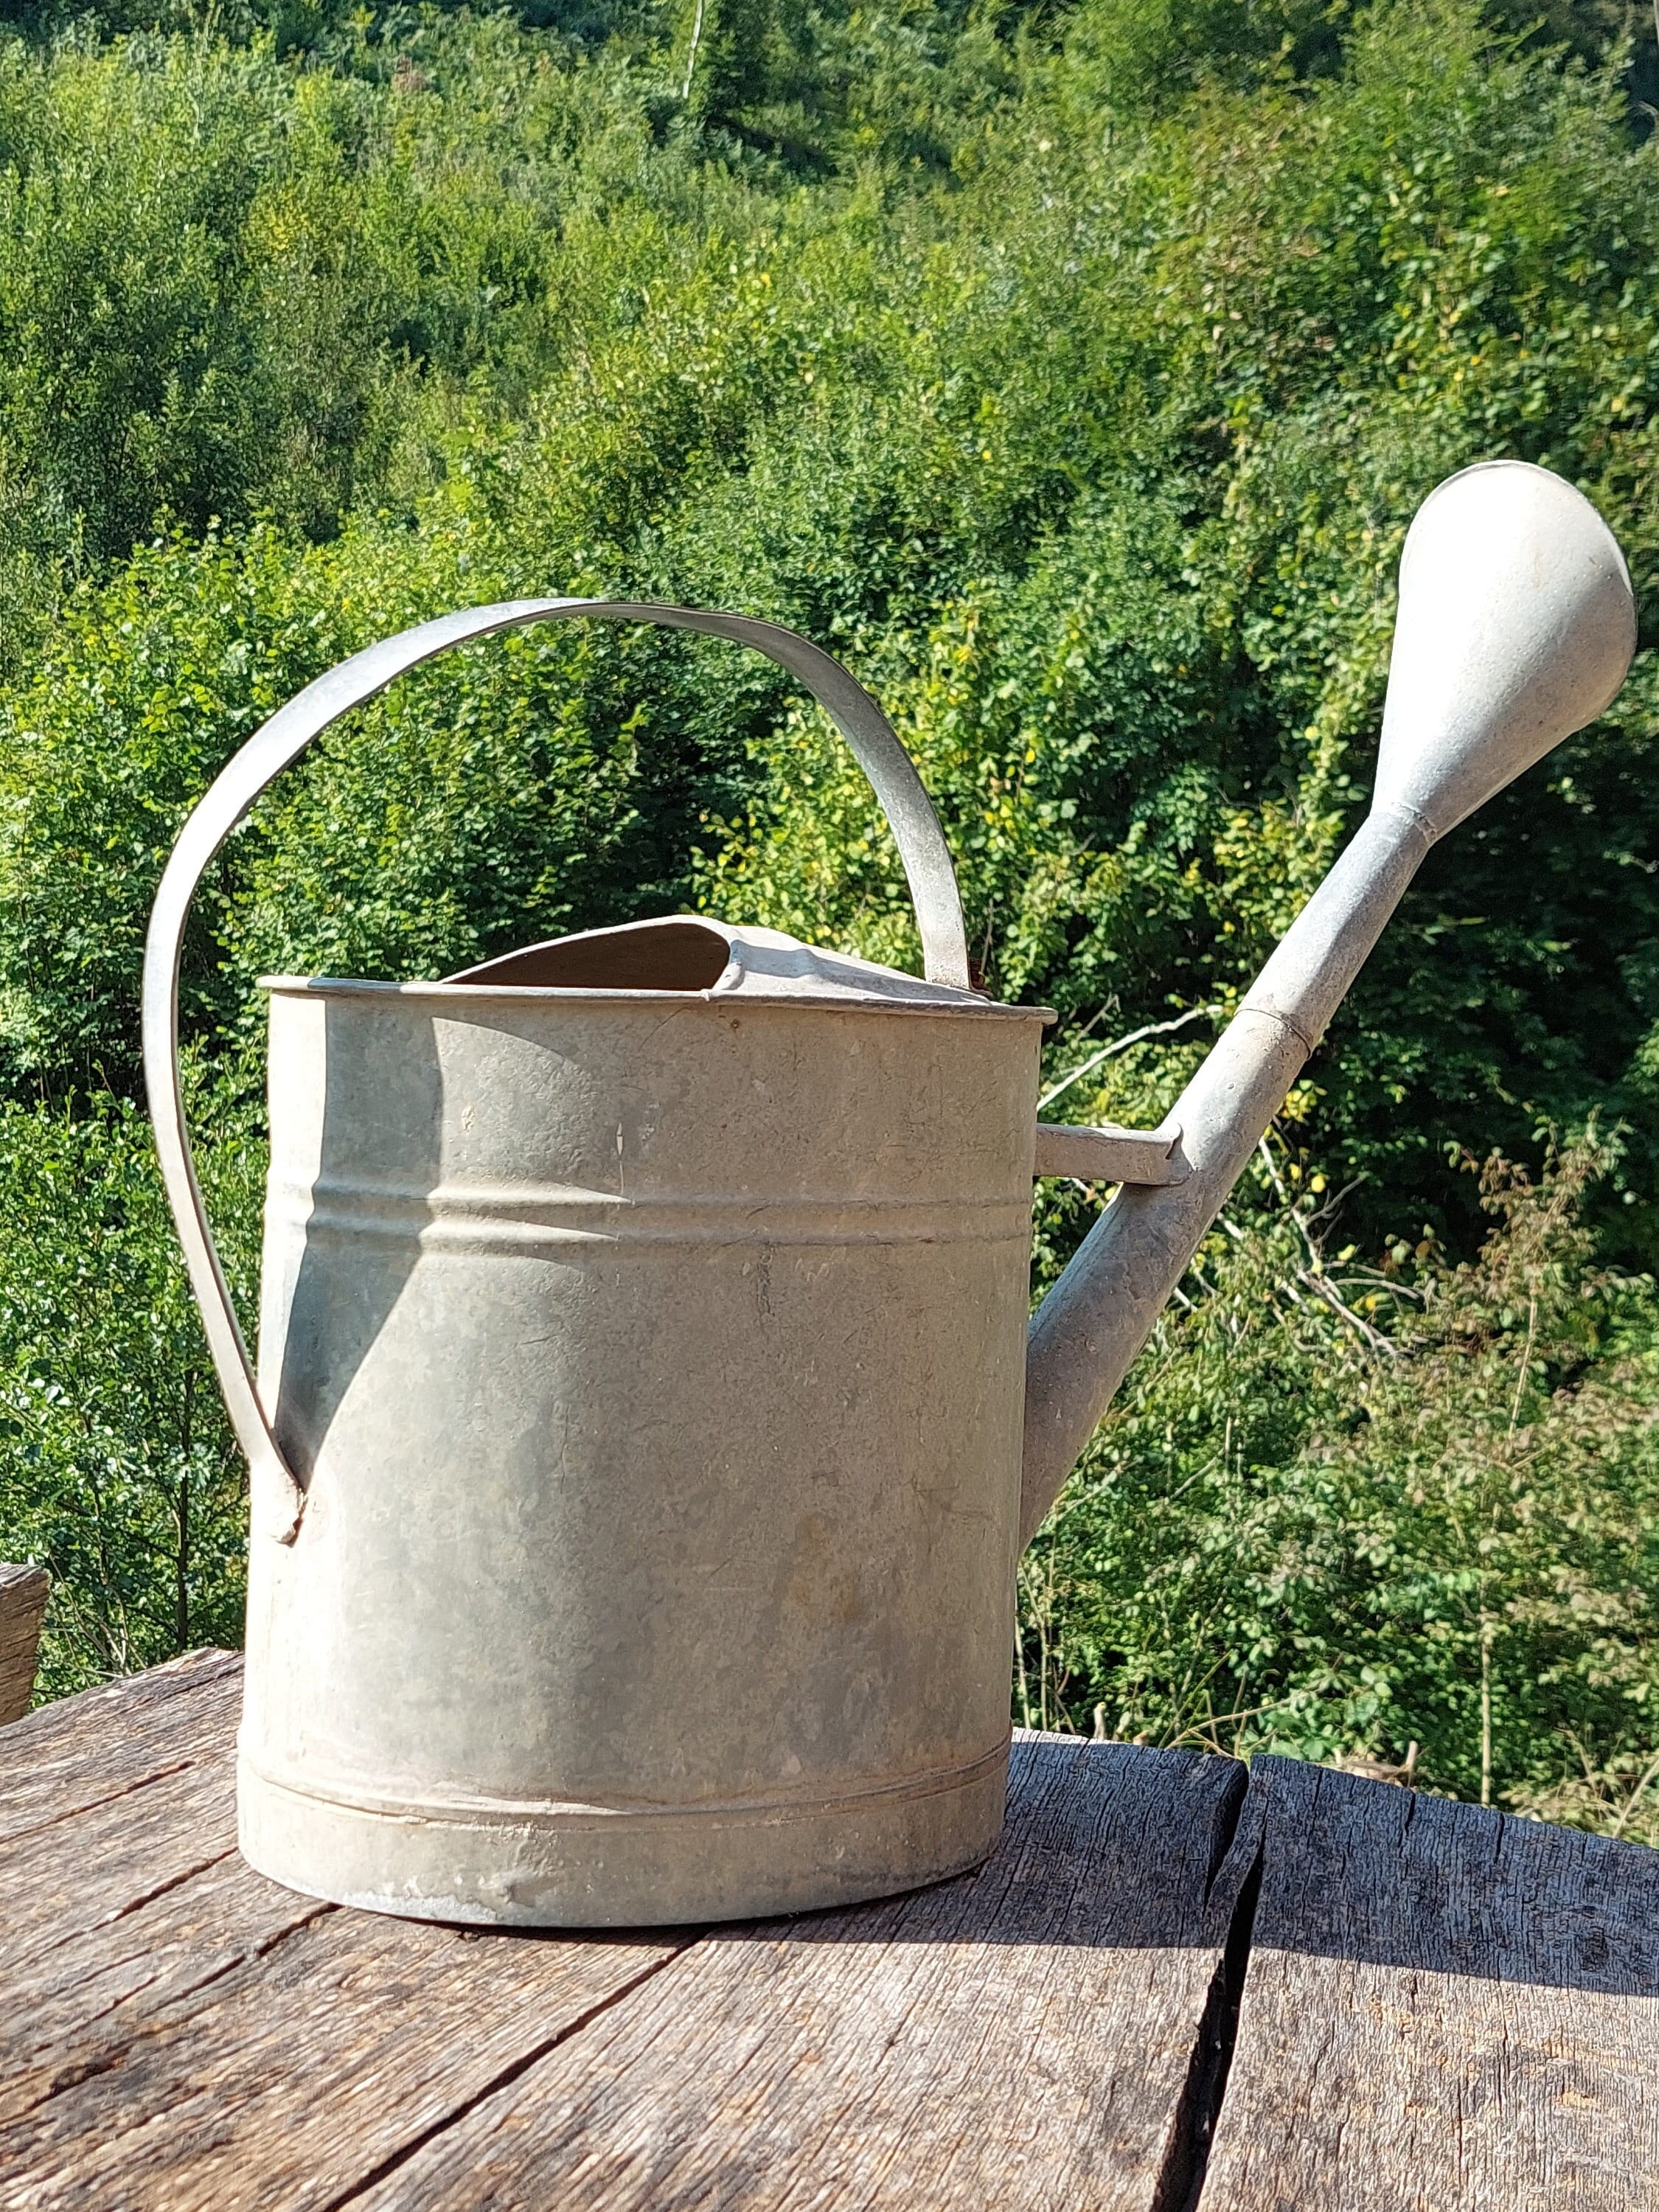 WEQUALITY Copper Watering Can for Outdoor&Indoor Plants，1 Gallon Metal Plant Watering Can,Galvanized Steel Gardening Tool，Antique Copper Colored. 